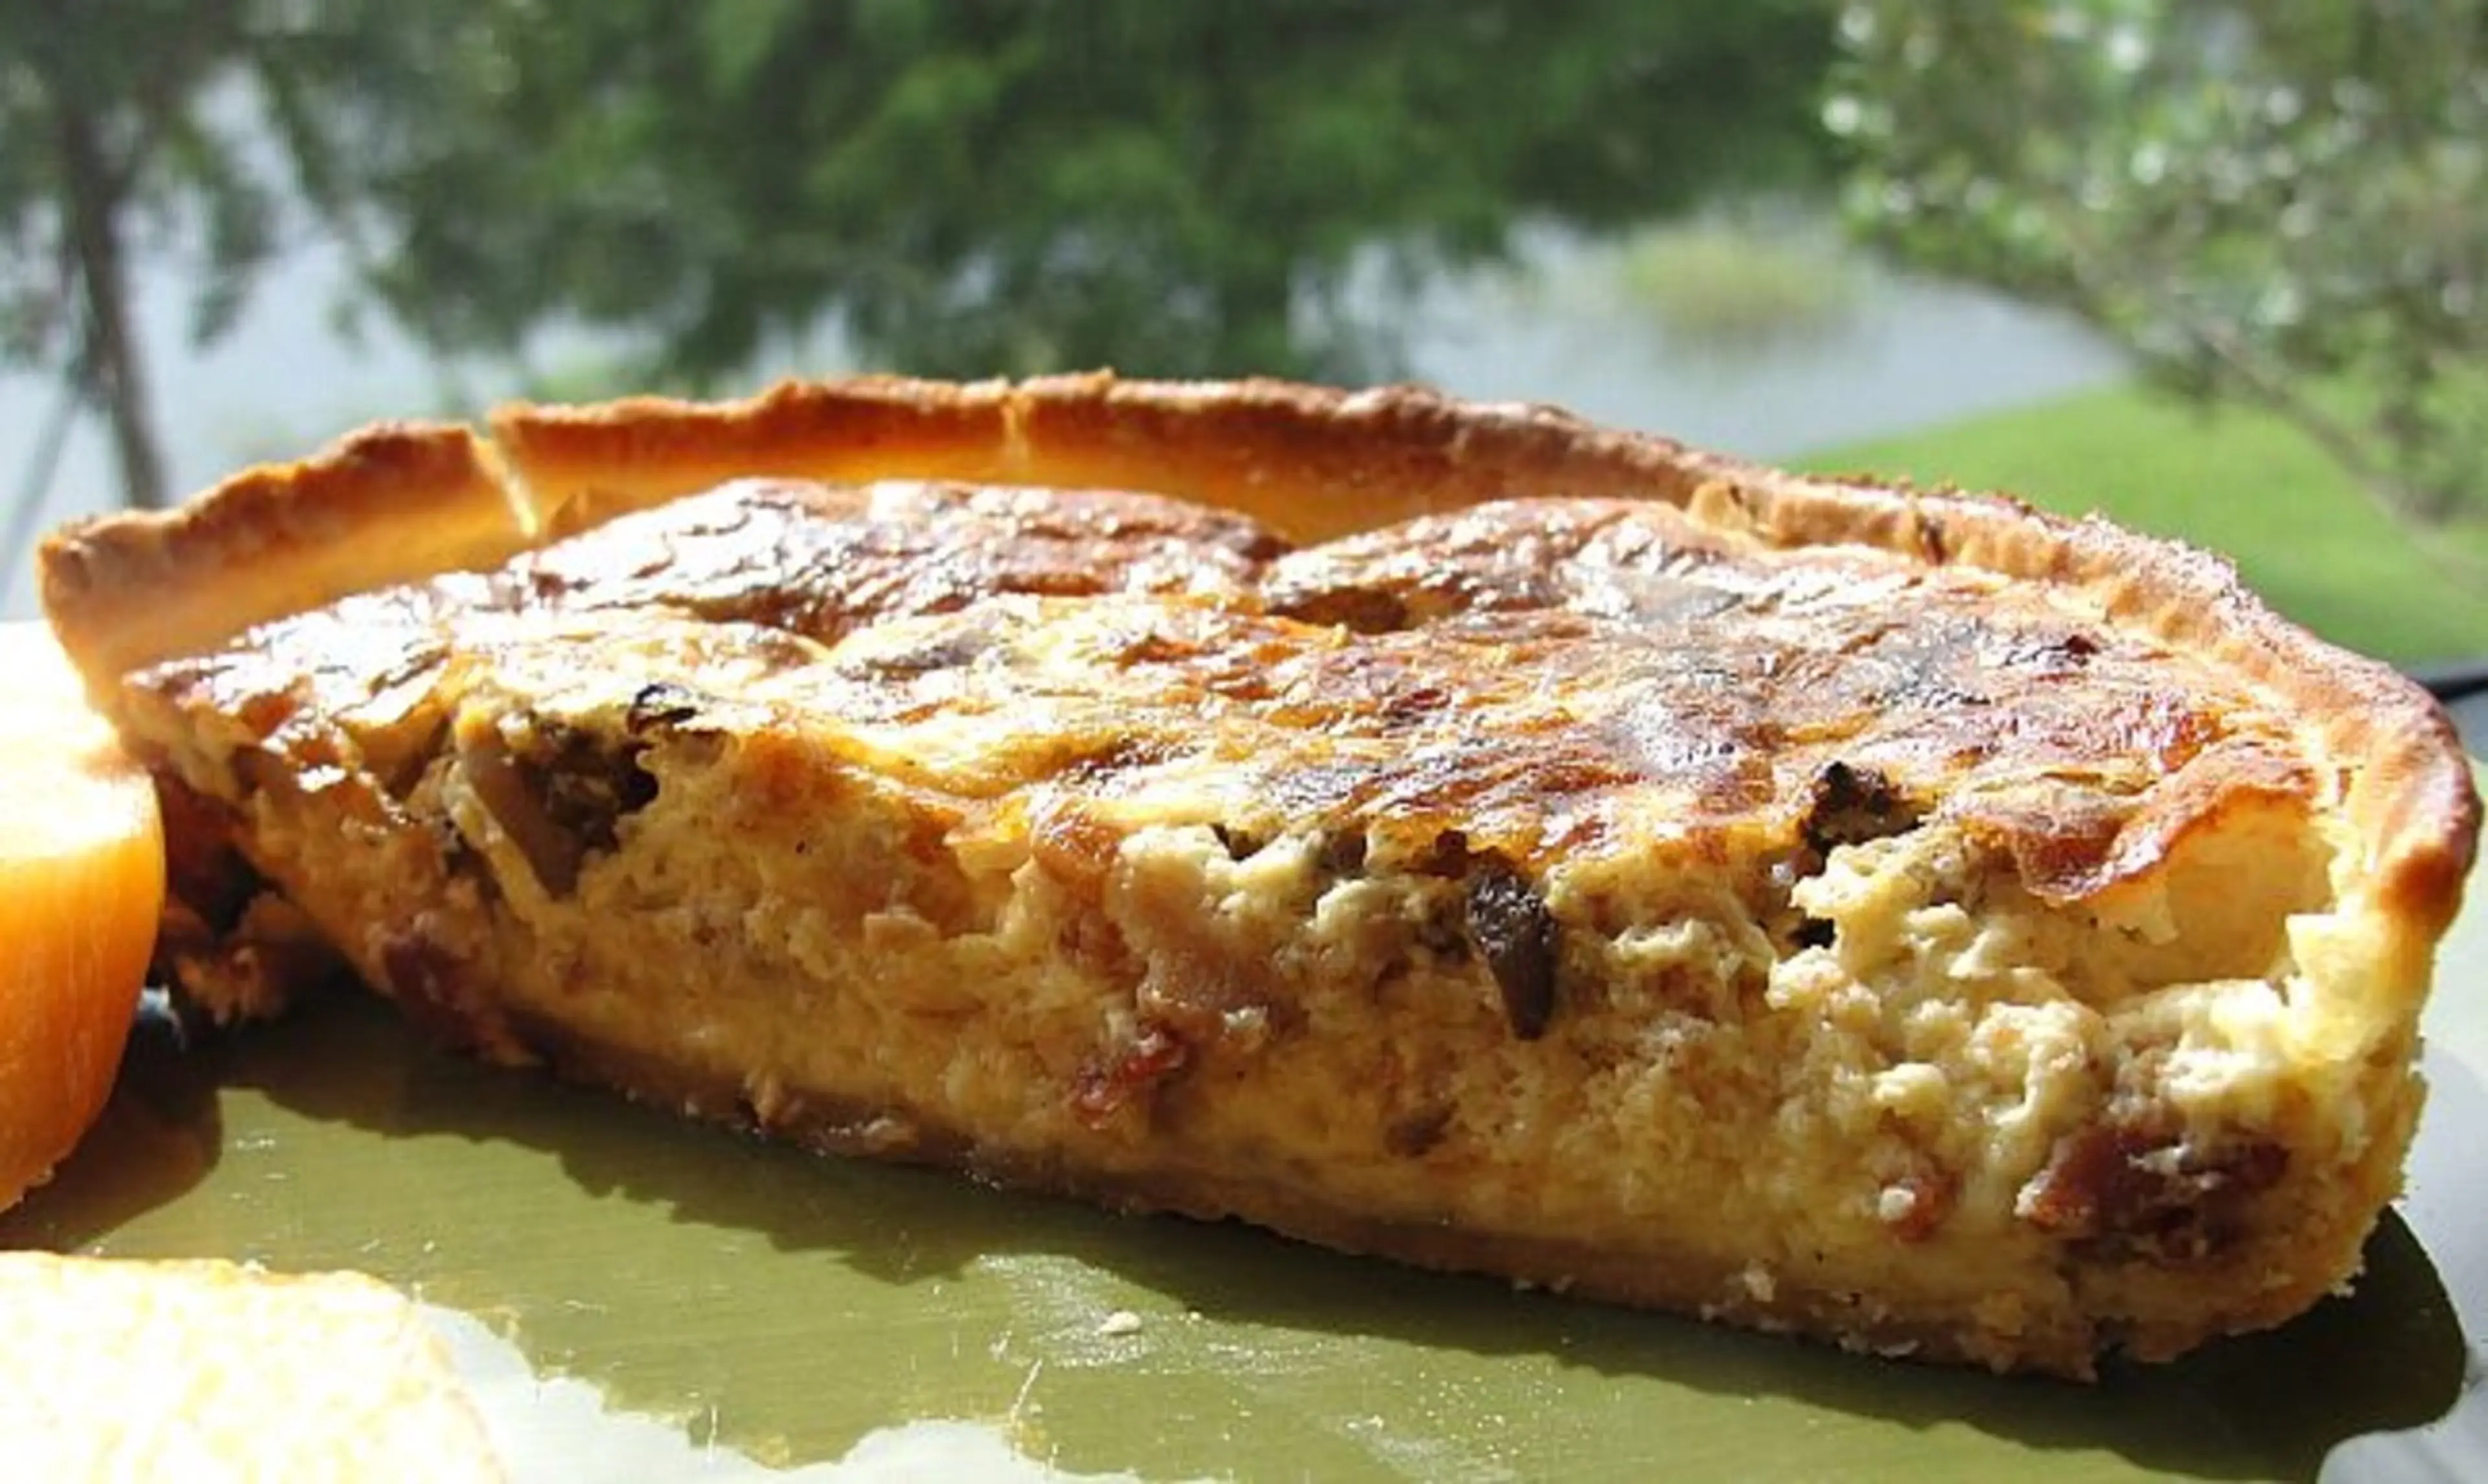 Moosewood Swiss Cheese and Mushroom Quiche